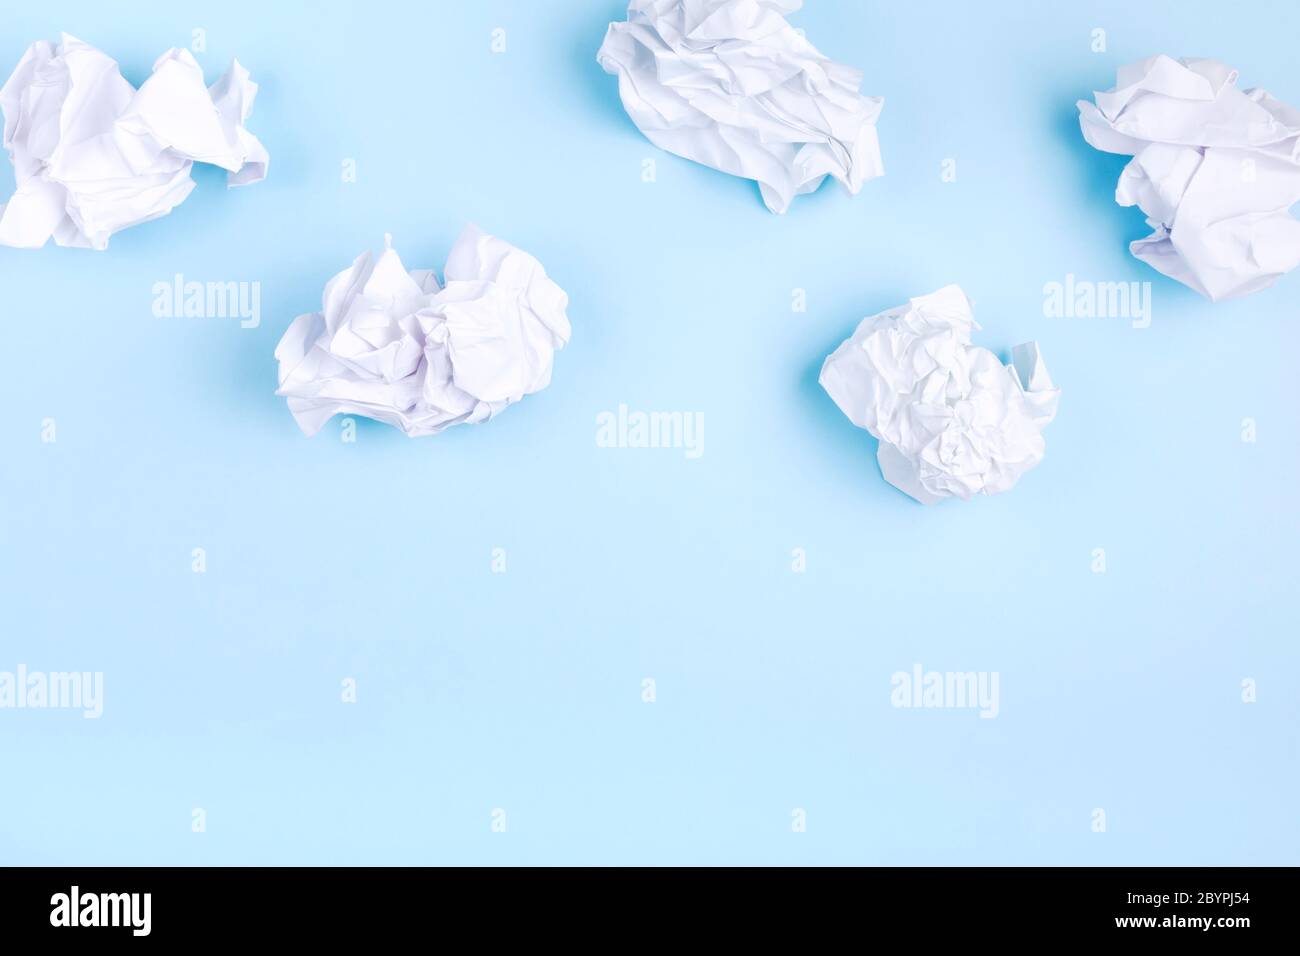 Crumpled white paper in the form of clouds on blue background. Concept head in clouds. Top view. Copy space Stock Photo